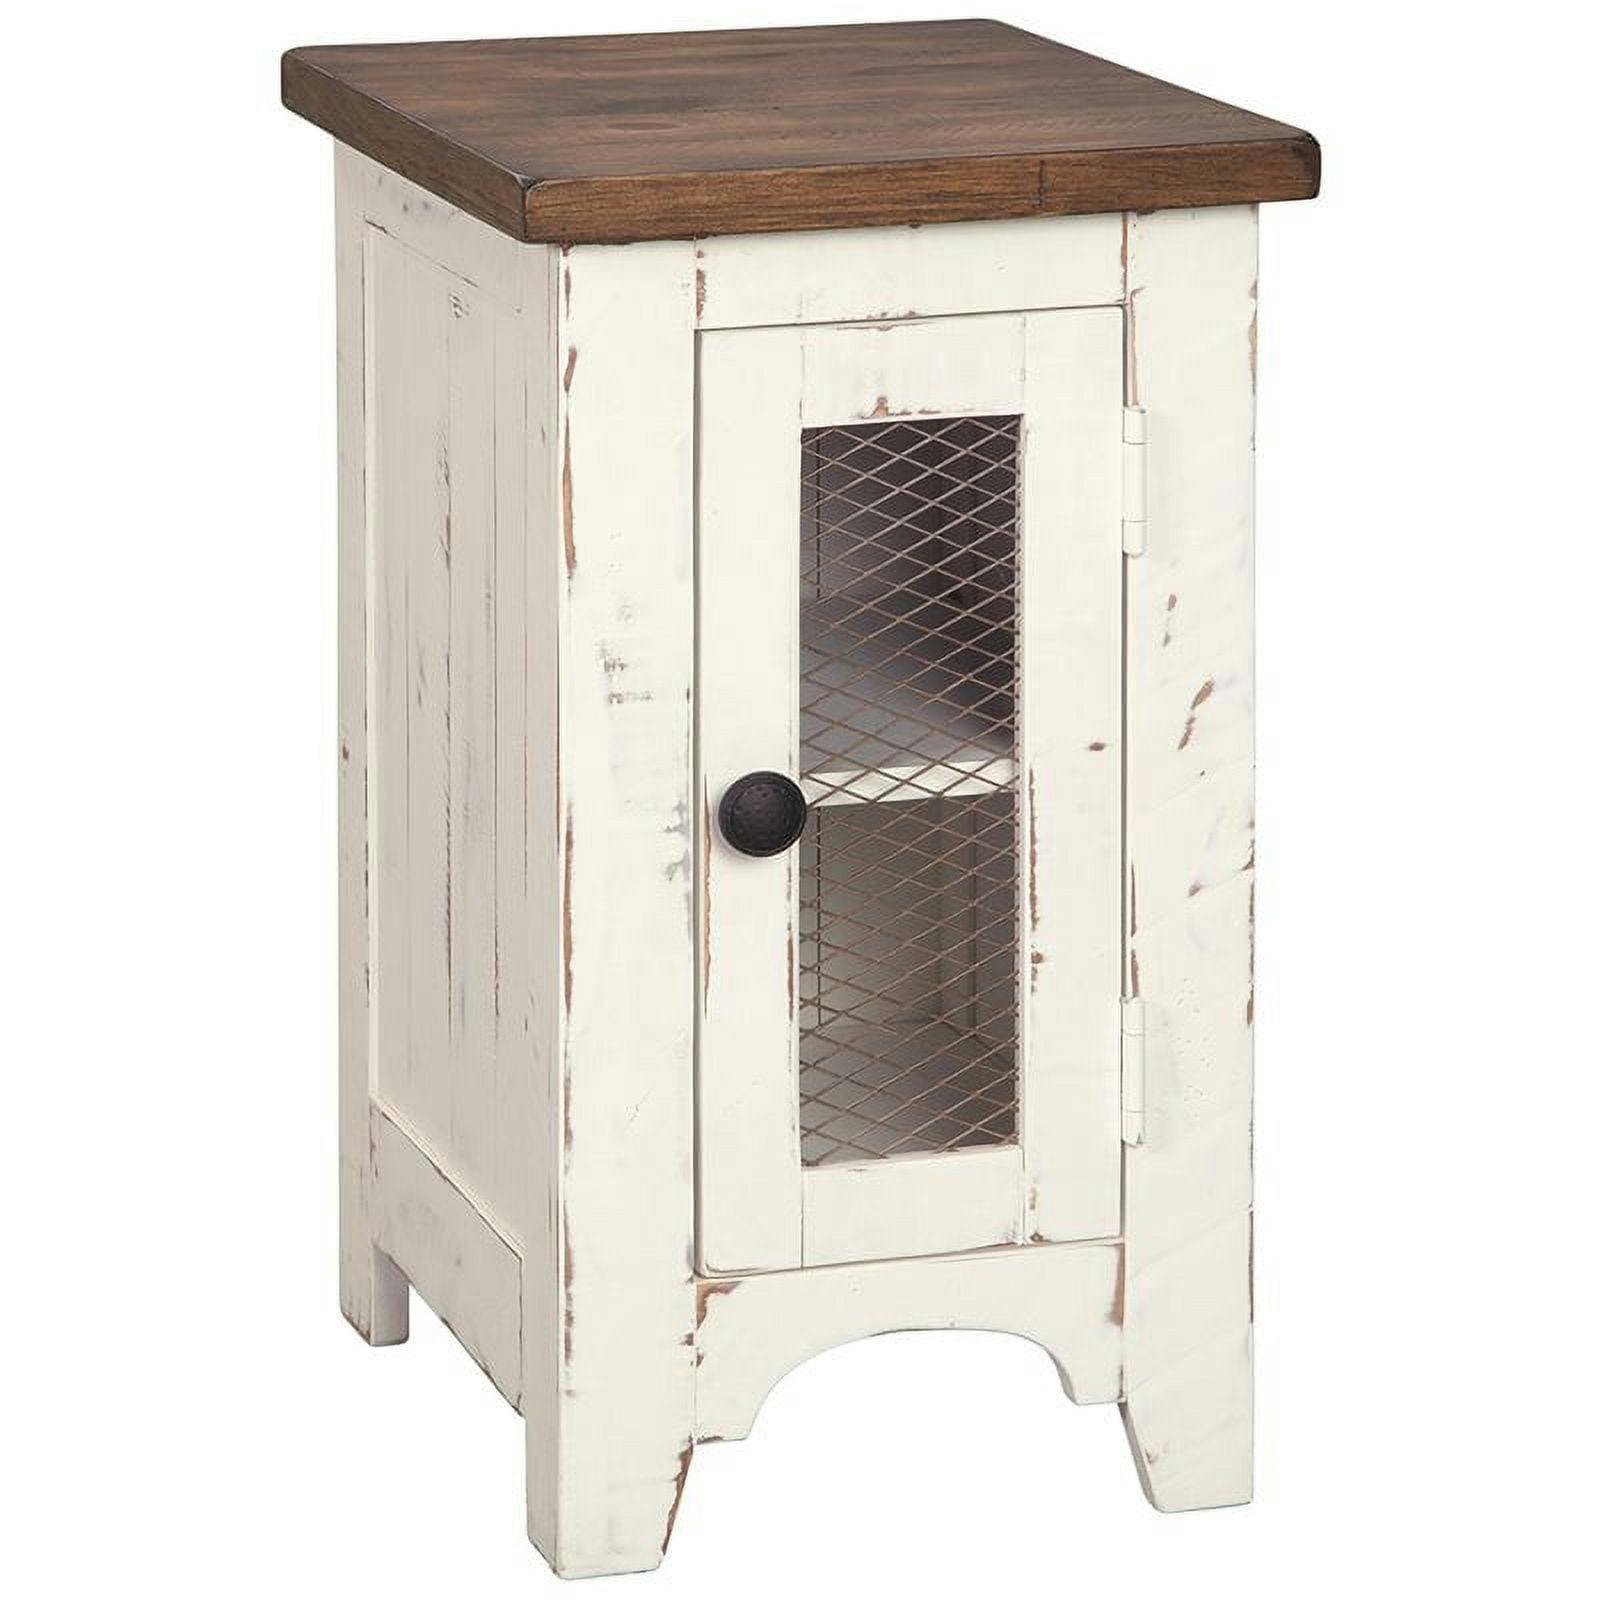 Modern Farmhouse Two-Tone Chairside Table with Storage